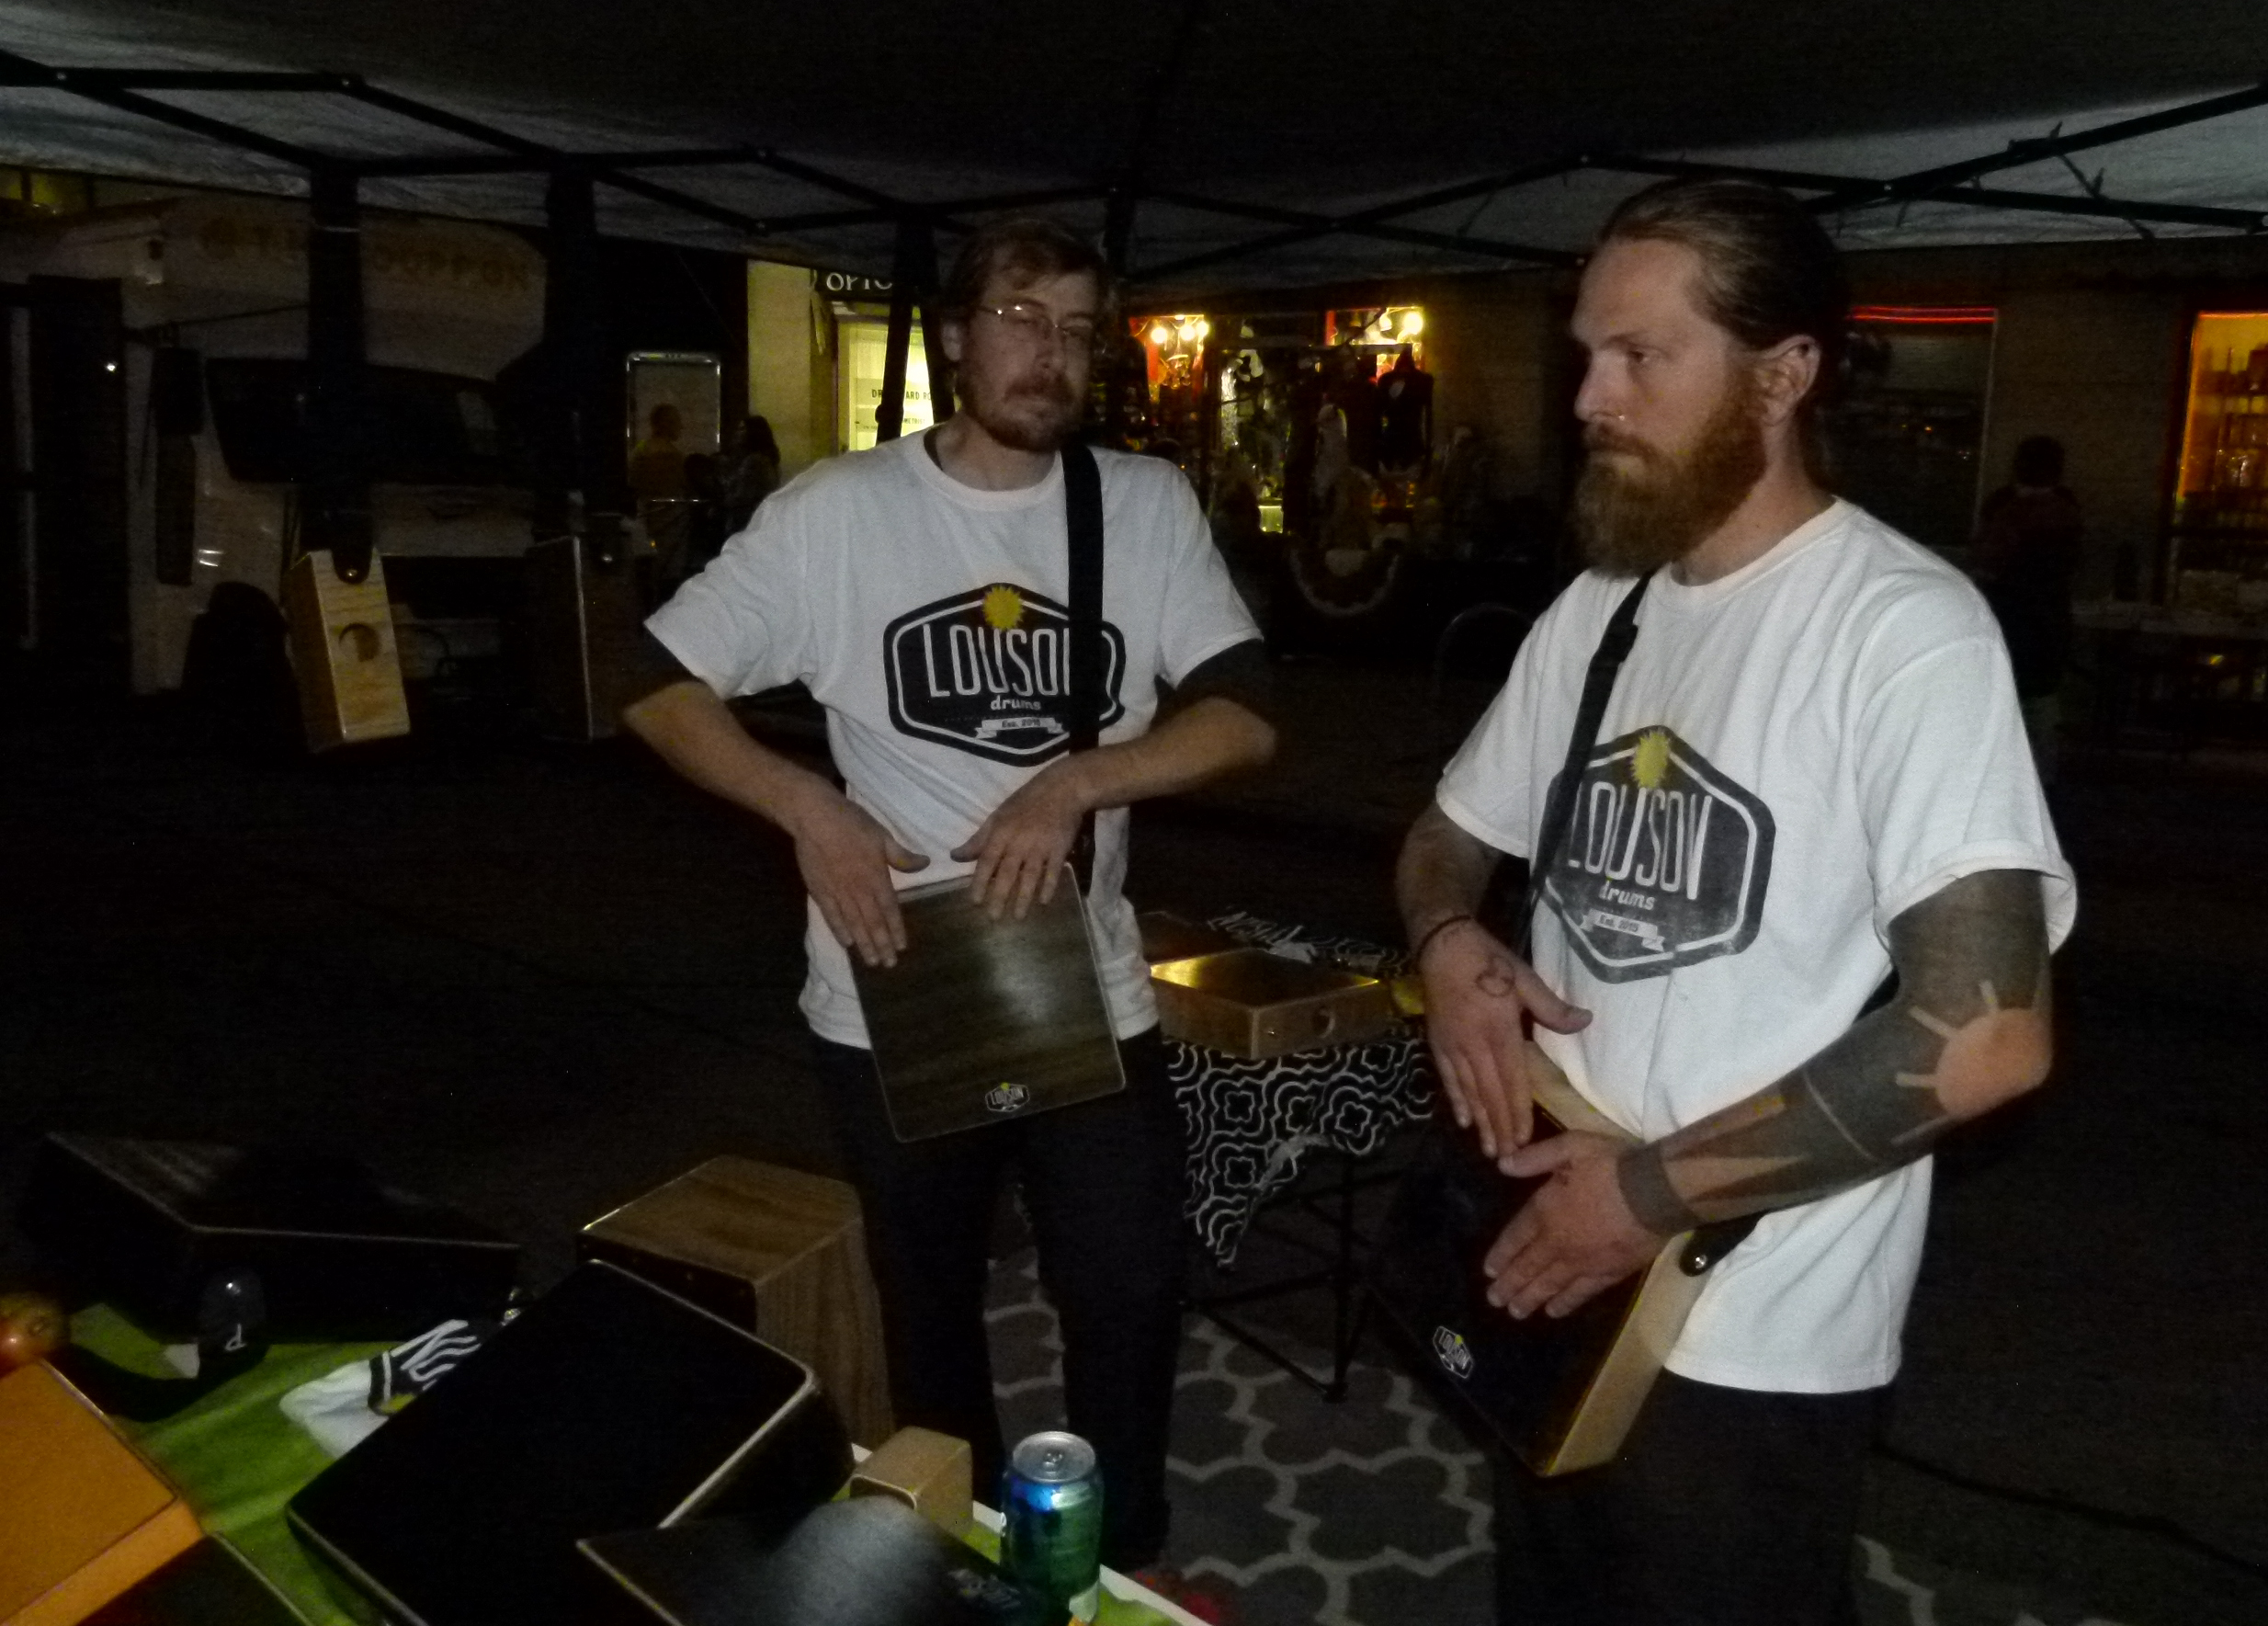 Carson Cashman (l.) and Lou Manione (r.) play cajon tablets. Their Louson CajonTabs are custom made and modeled on a Peruvian percussion instrument.